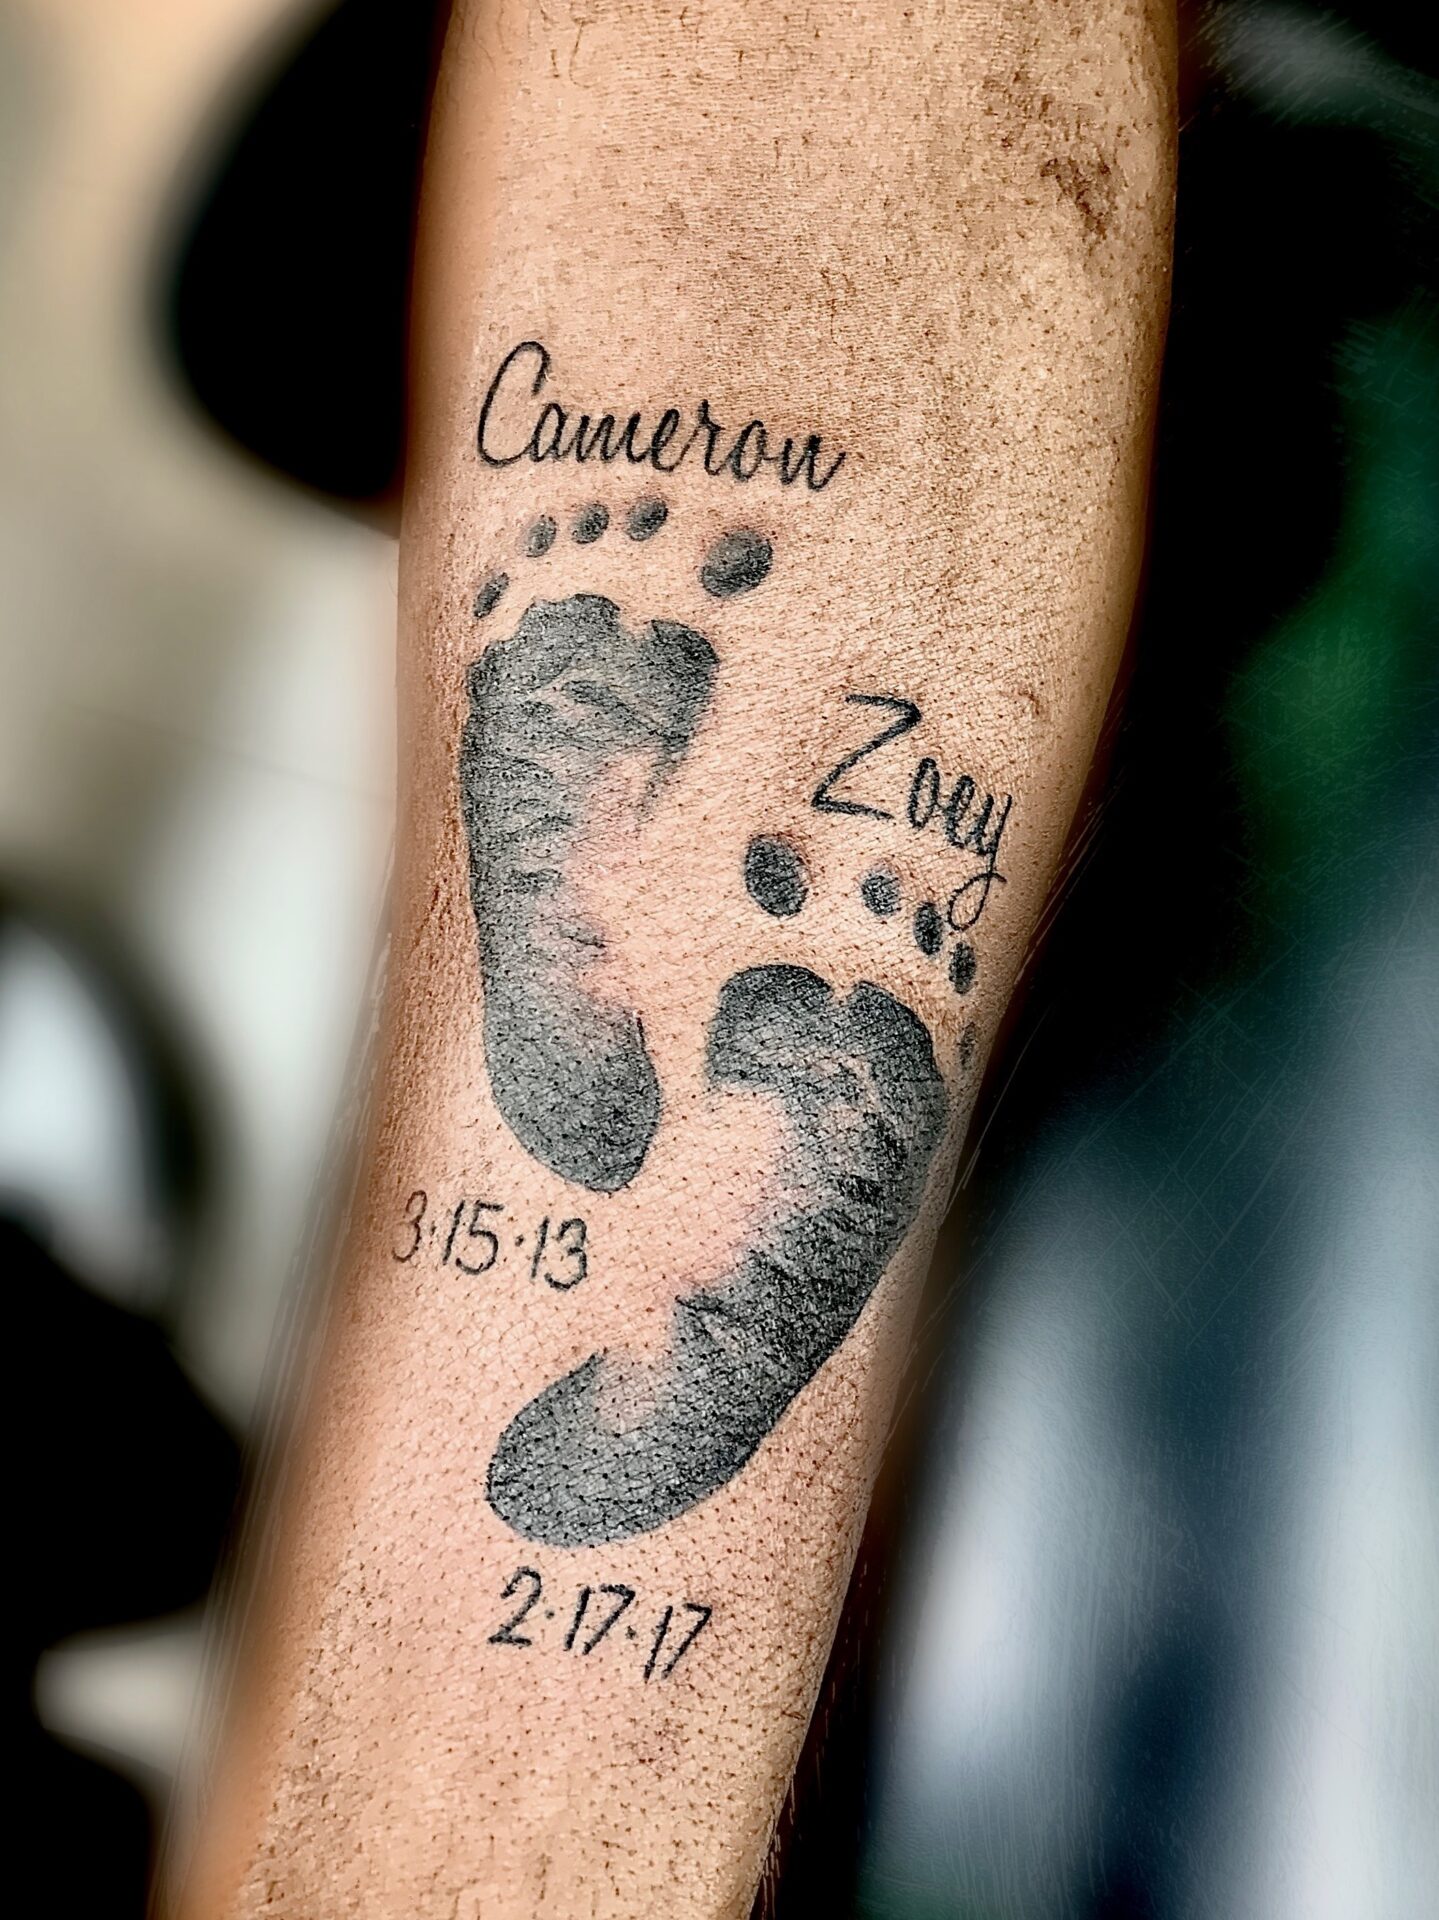 A tattoo of two feet with the date and name cameron zogby.